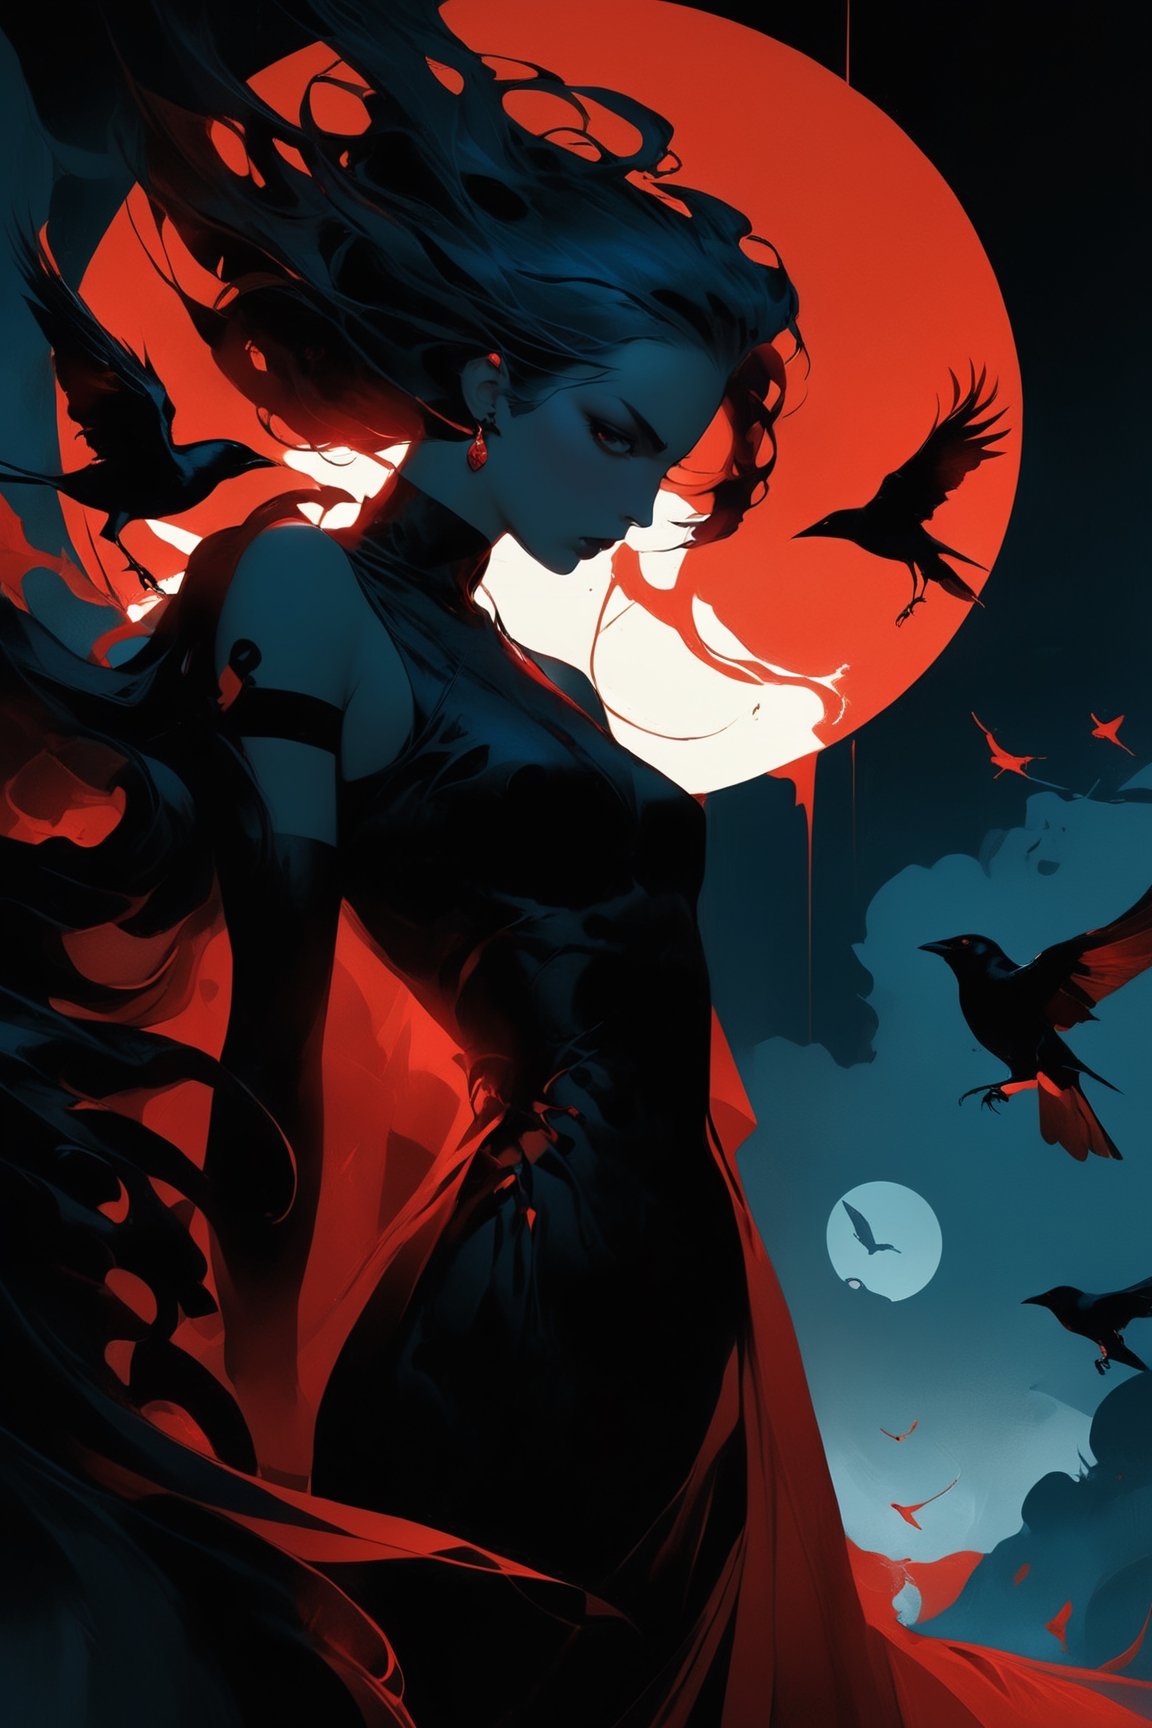 a woman standing in front of a full moon, digital art, Artstation, gothic art, crows as a symbol of death, artgerm and james jean, metal album cover art, 2d art cover, avatar image, joshua middleton comic art, light red and deep blue mood, beautiful depiction,anx13ty_style,twisted_thoughts,ct-niji2